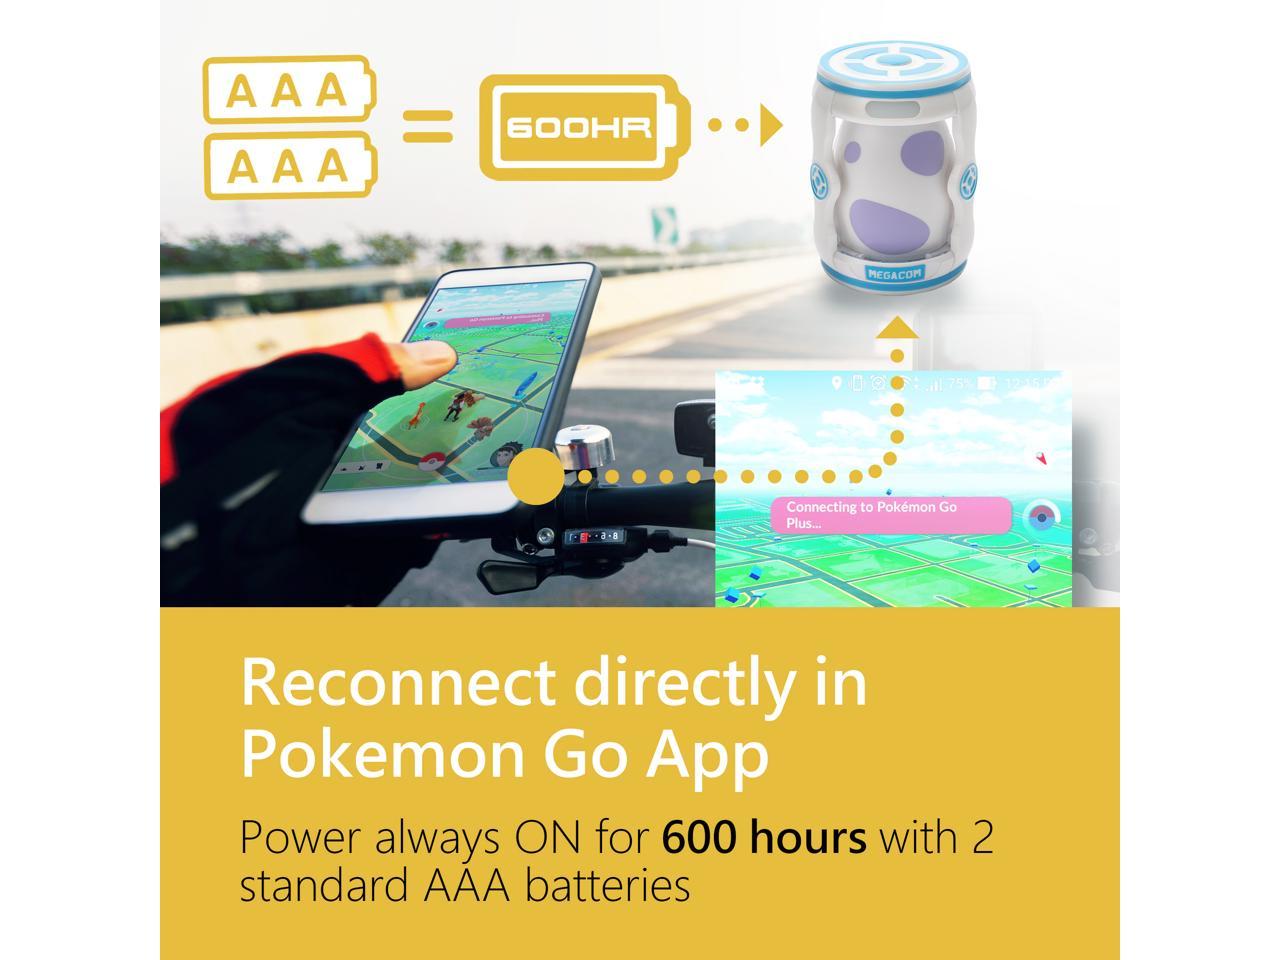 Portable Always On Pokemon Go Plus Auto Catch Accessory Wireless Bluetooth Catcher for iPhone & Android with Long Lasting Battery MEGACOM Catchmon Go Pink Auto Catcher for Pokemon Go Plus